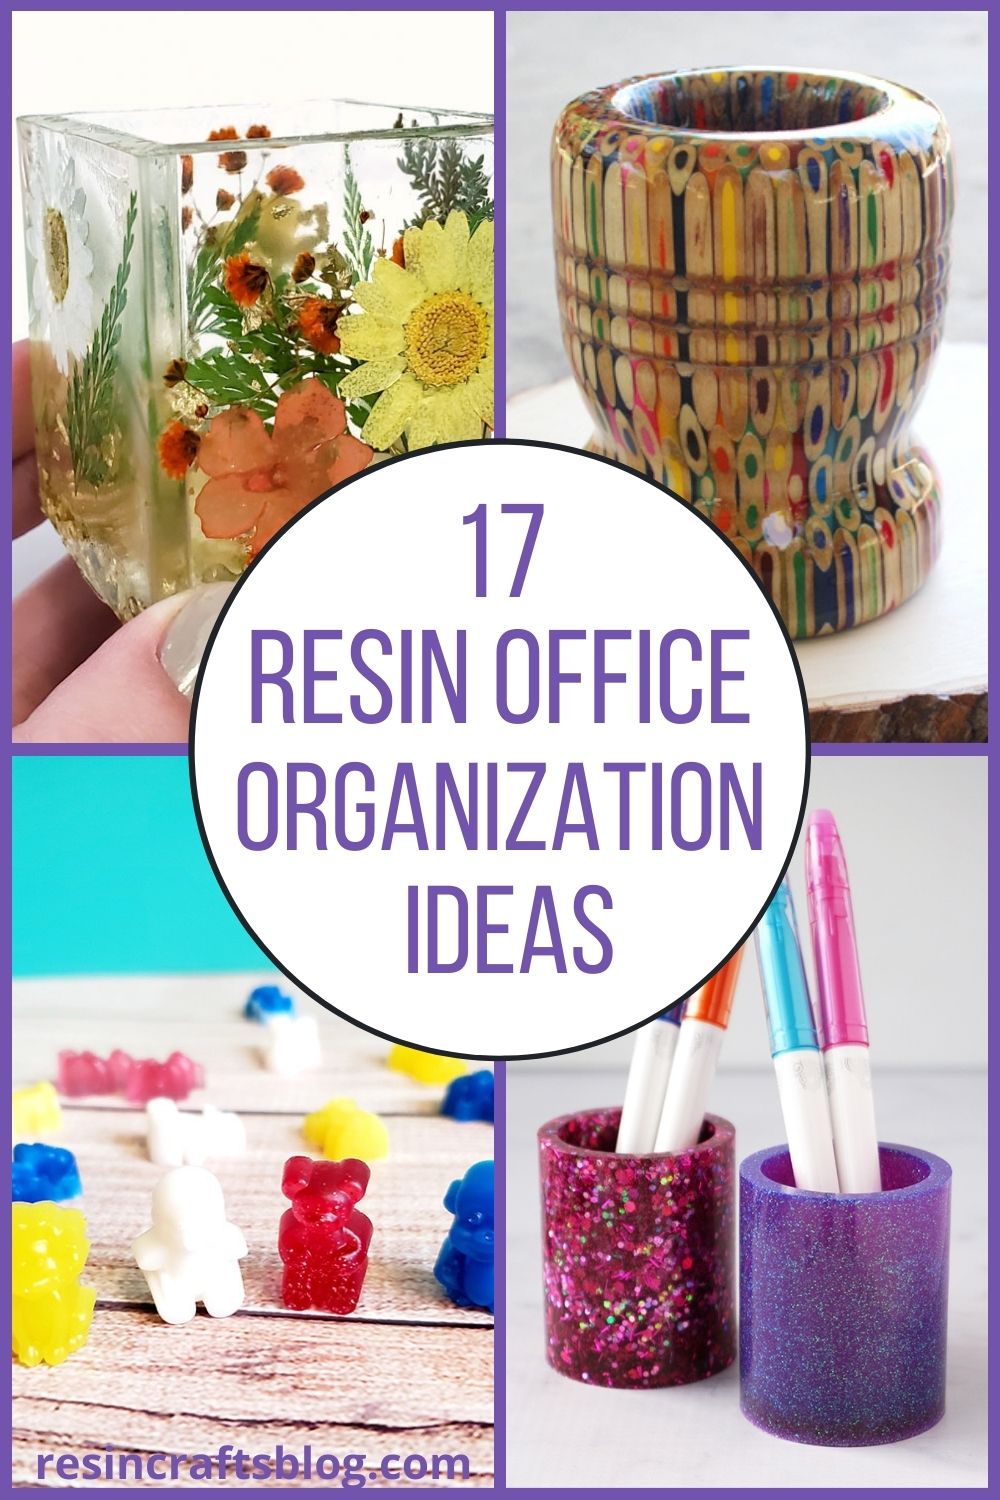 resin organization ideas pin collage with text overlay